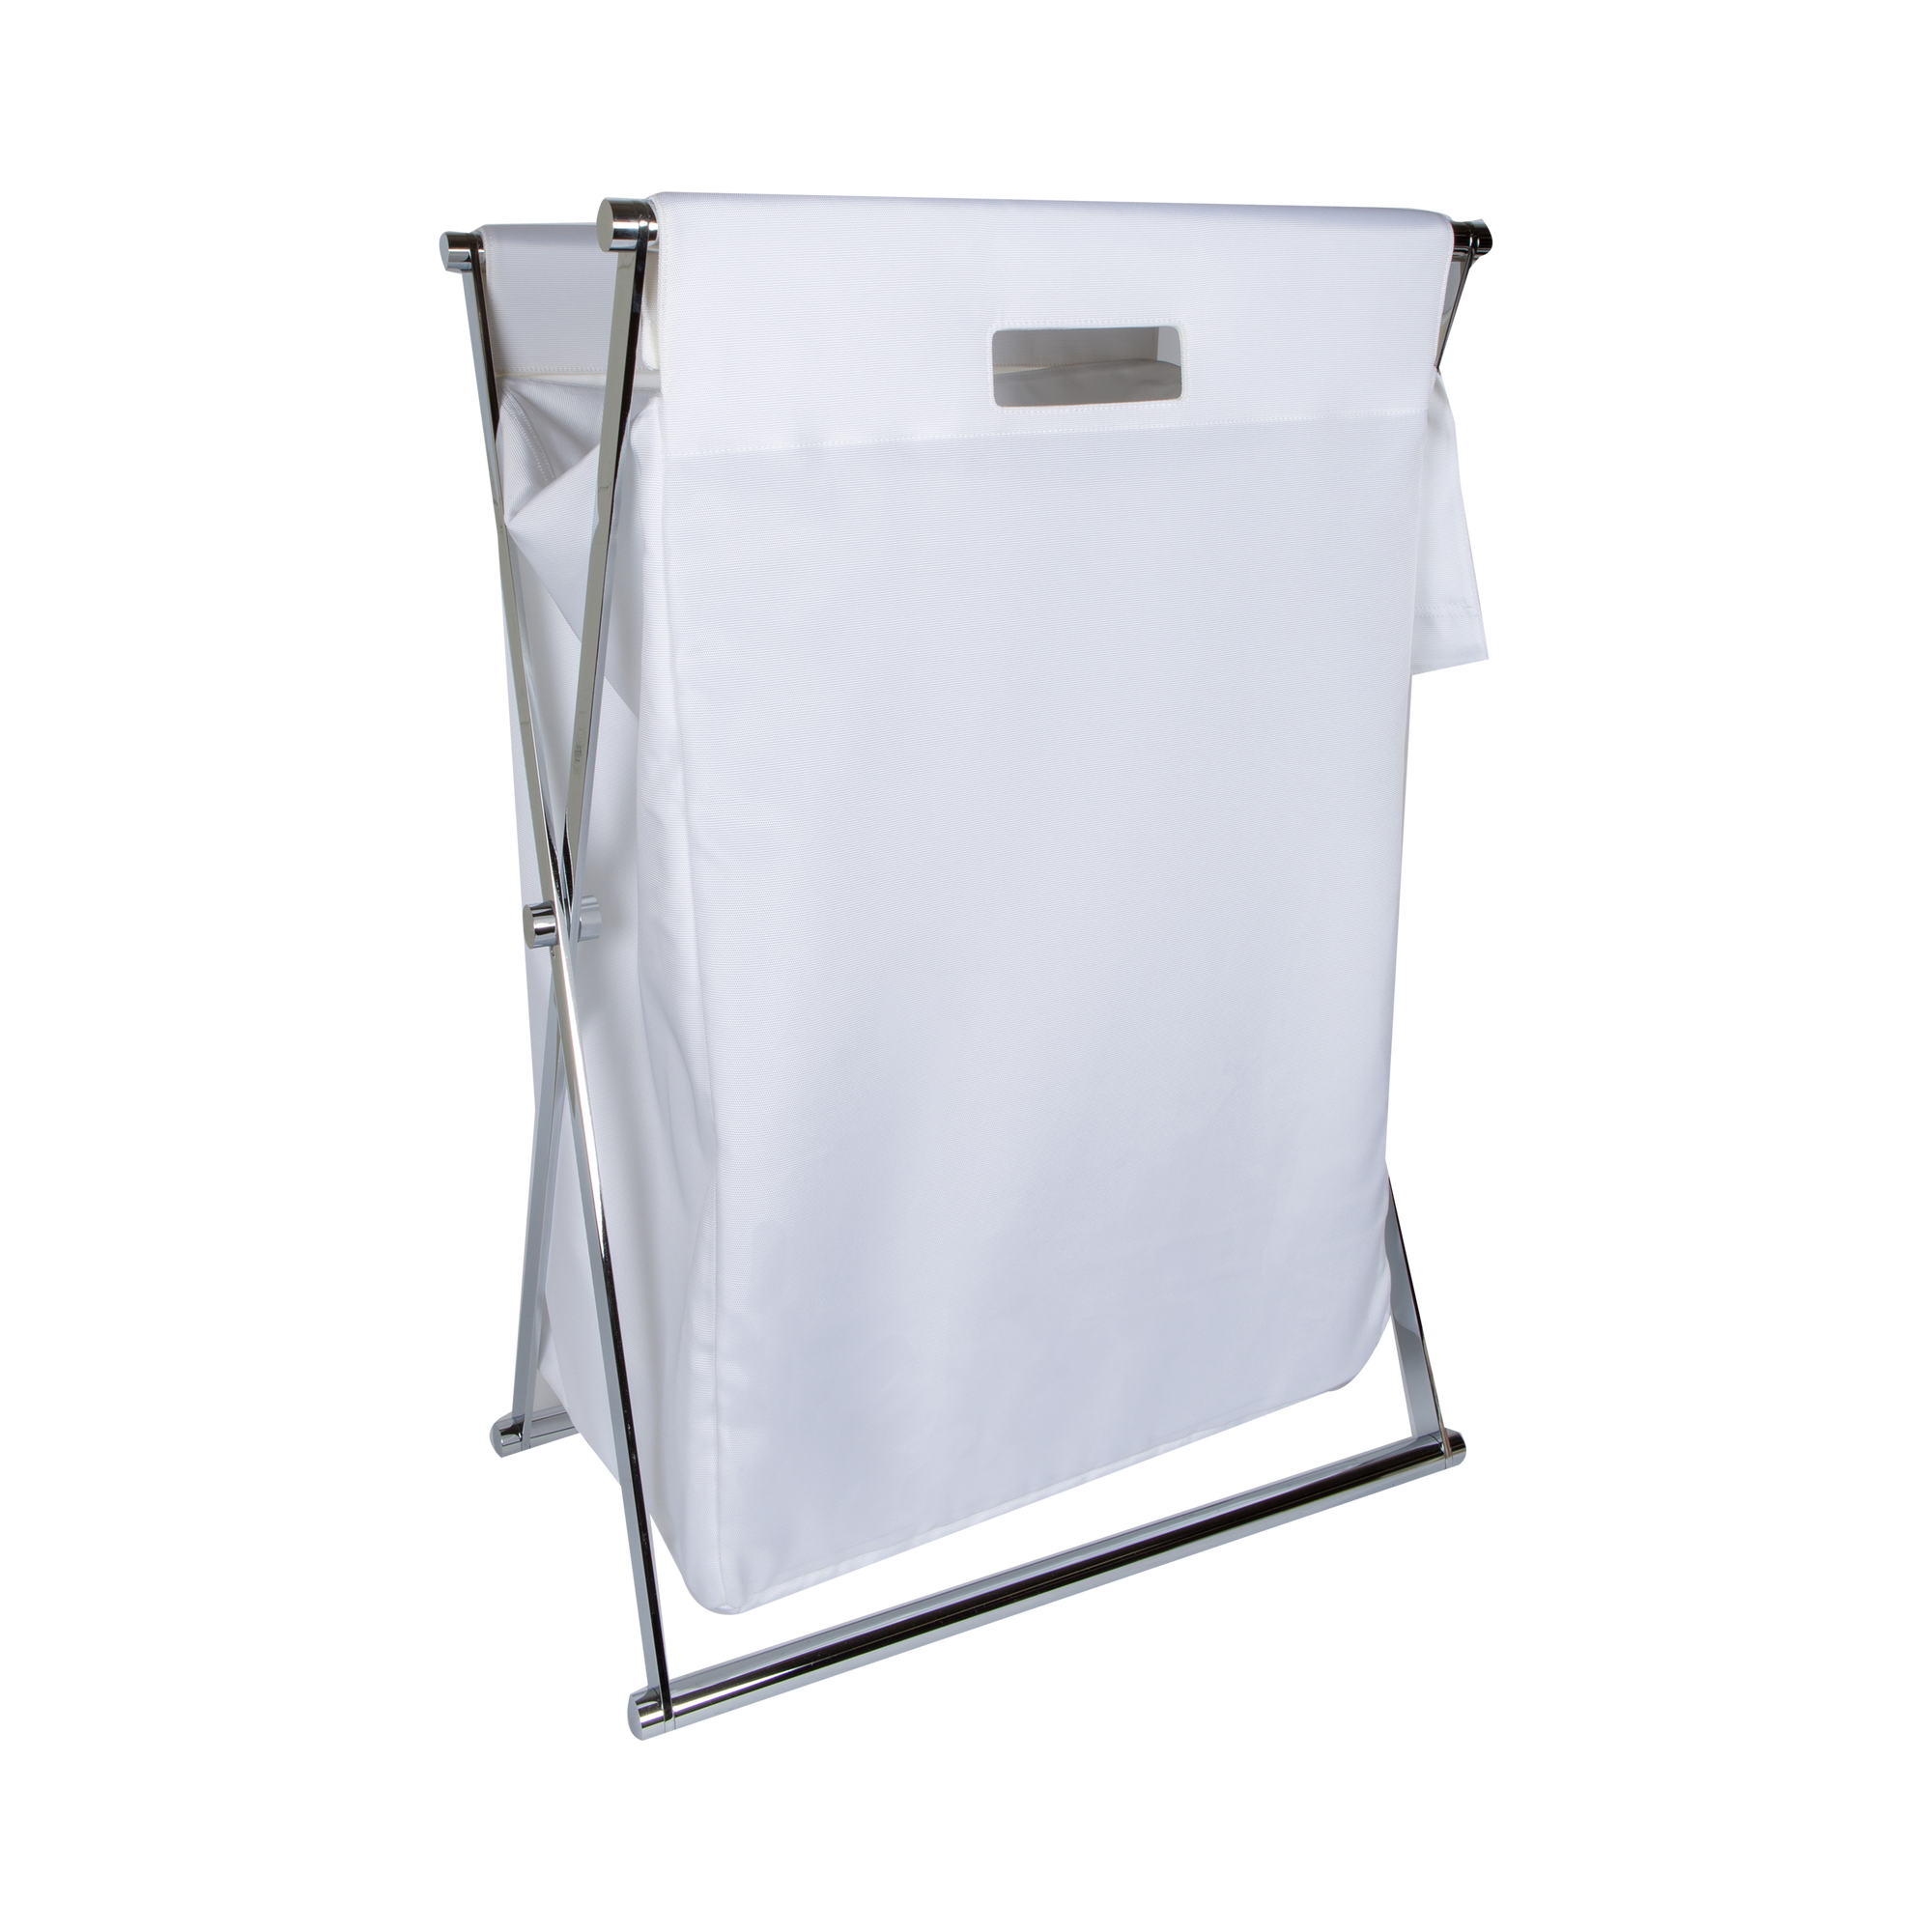 The Cross Laundry Basket features a chrome frame with nylon laundry bag.